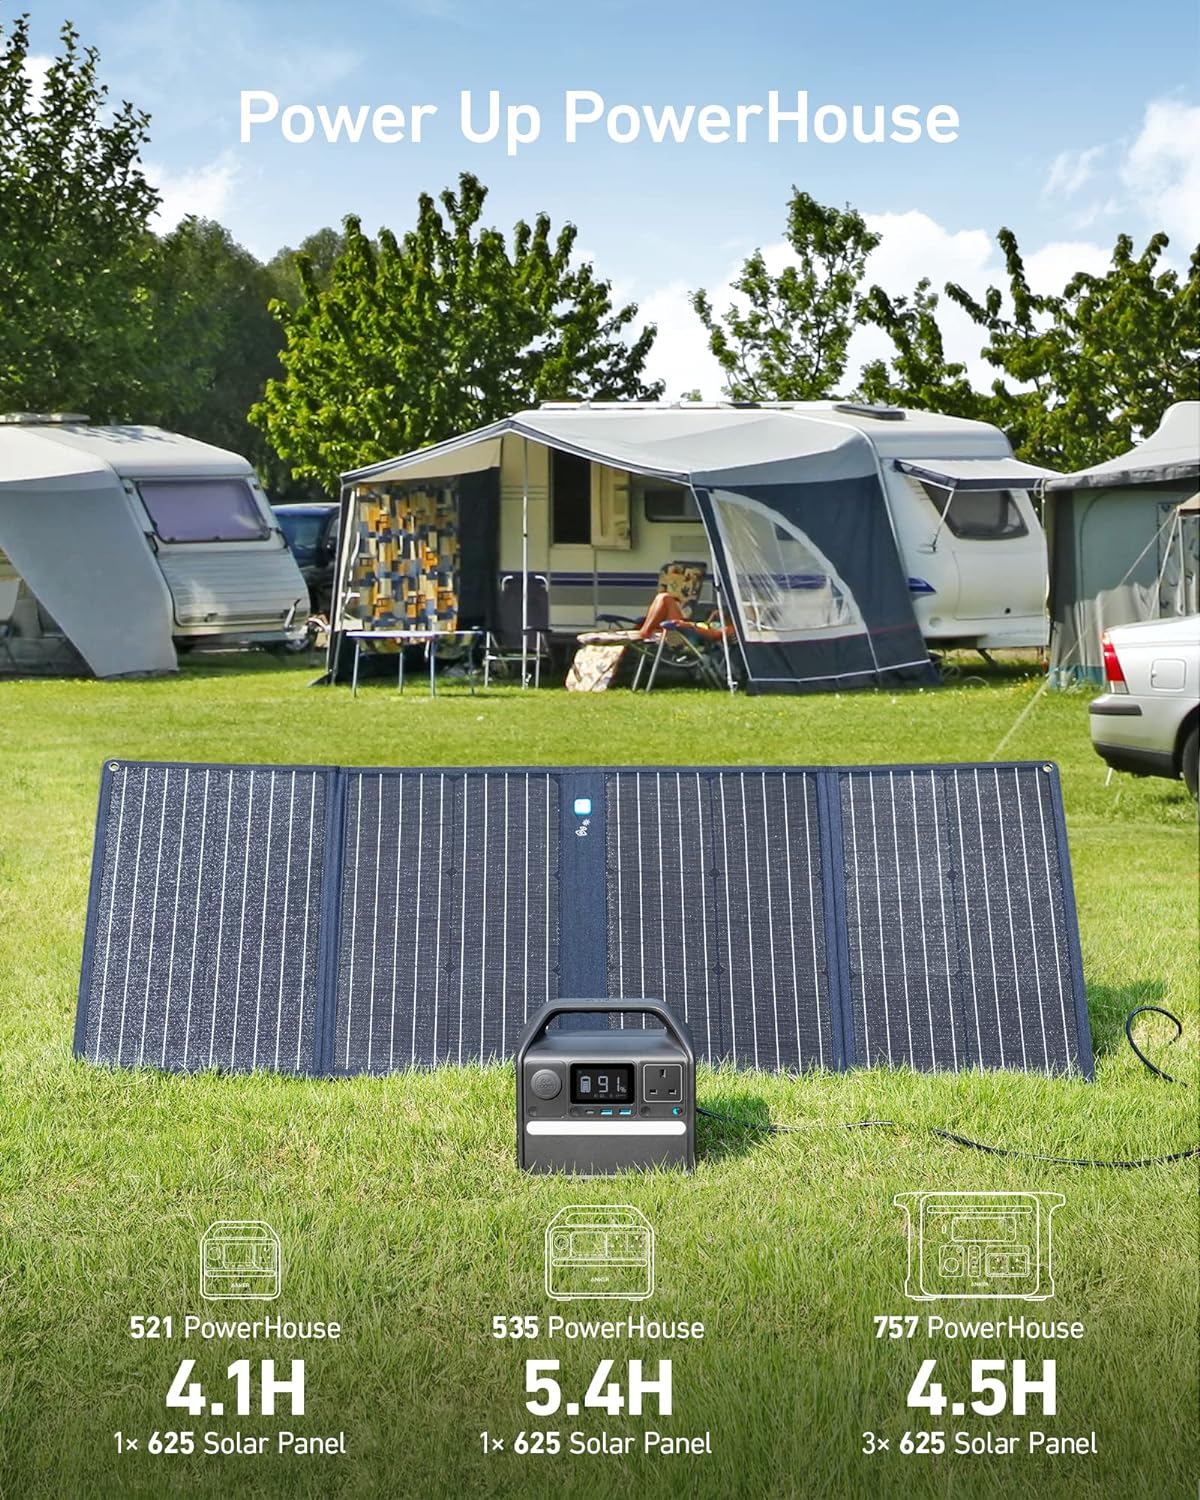 Anker 100W Solar Panel Portable Power Solution for Camping Hiking and Emergencies